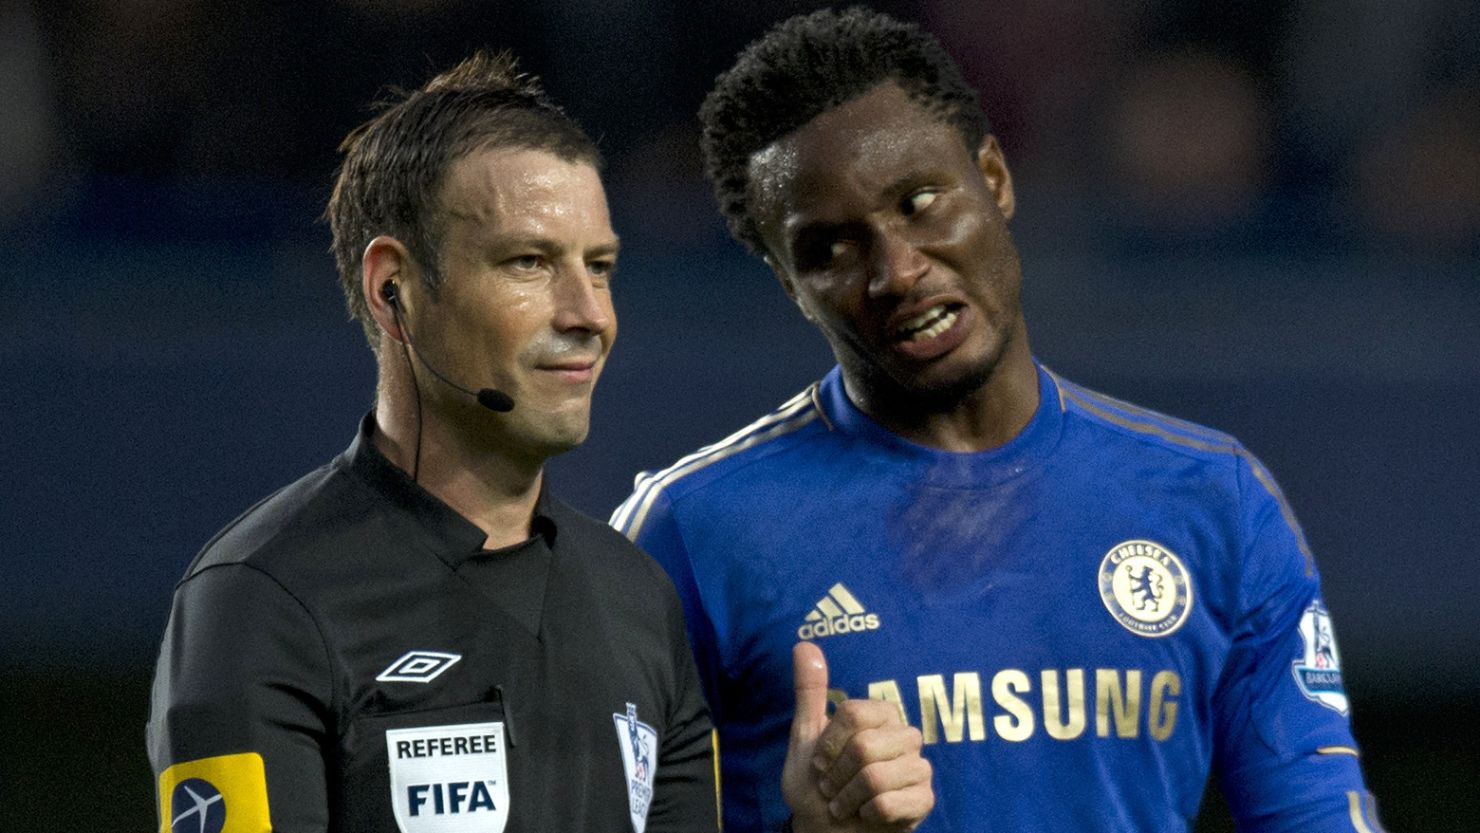 Chelsea midfielder John Obi Mikel remonstrates with referee Mark Clattenburg during Sunday's 3-2 home defeat.